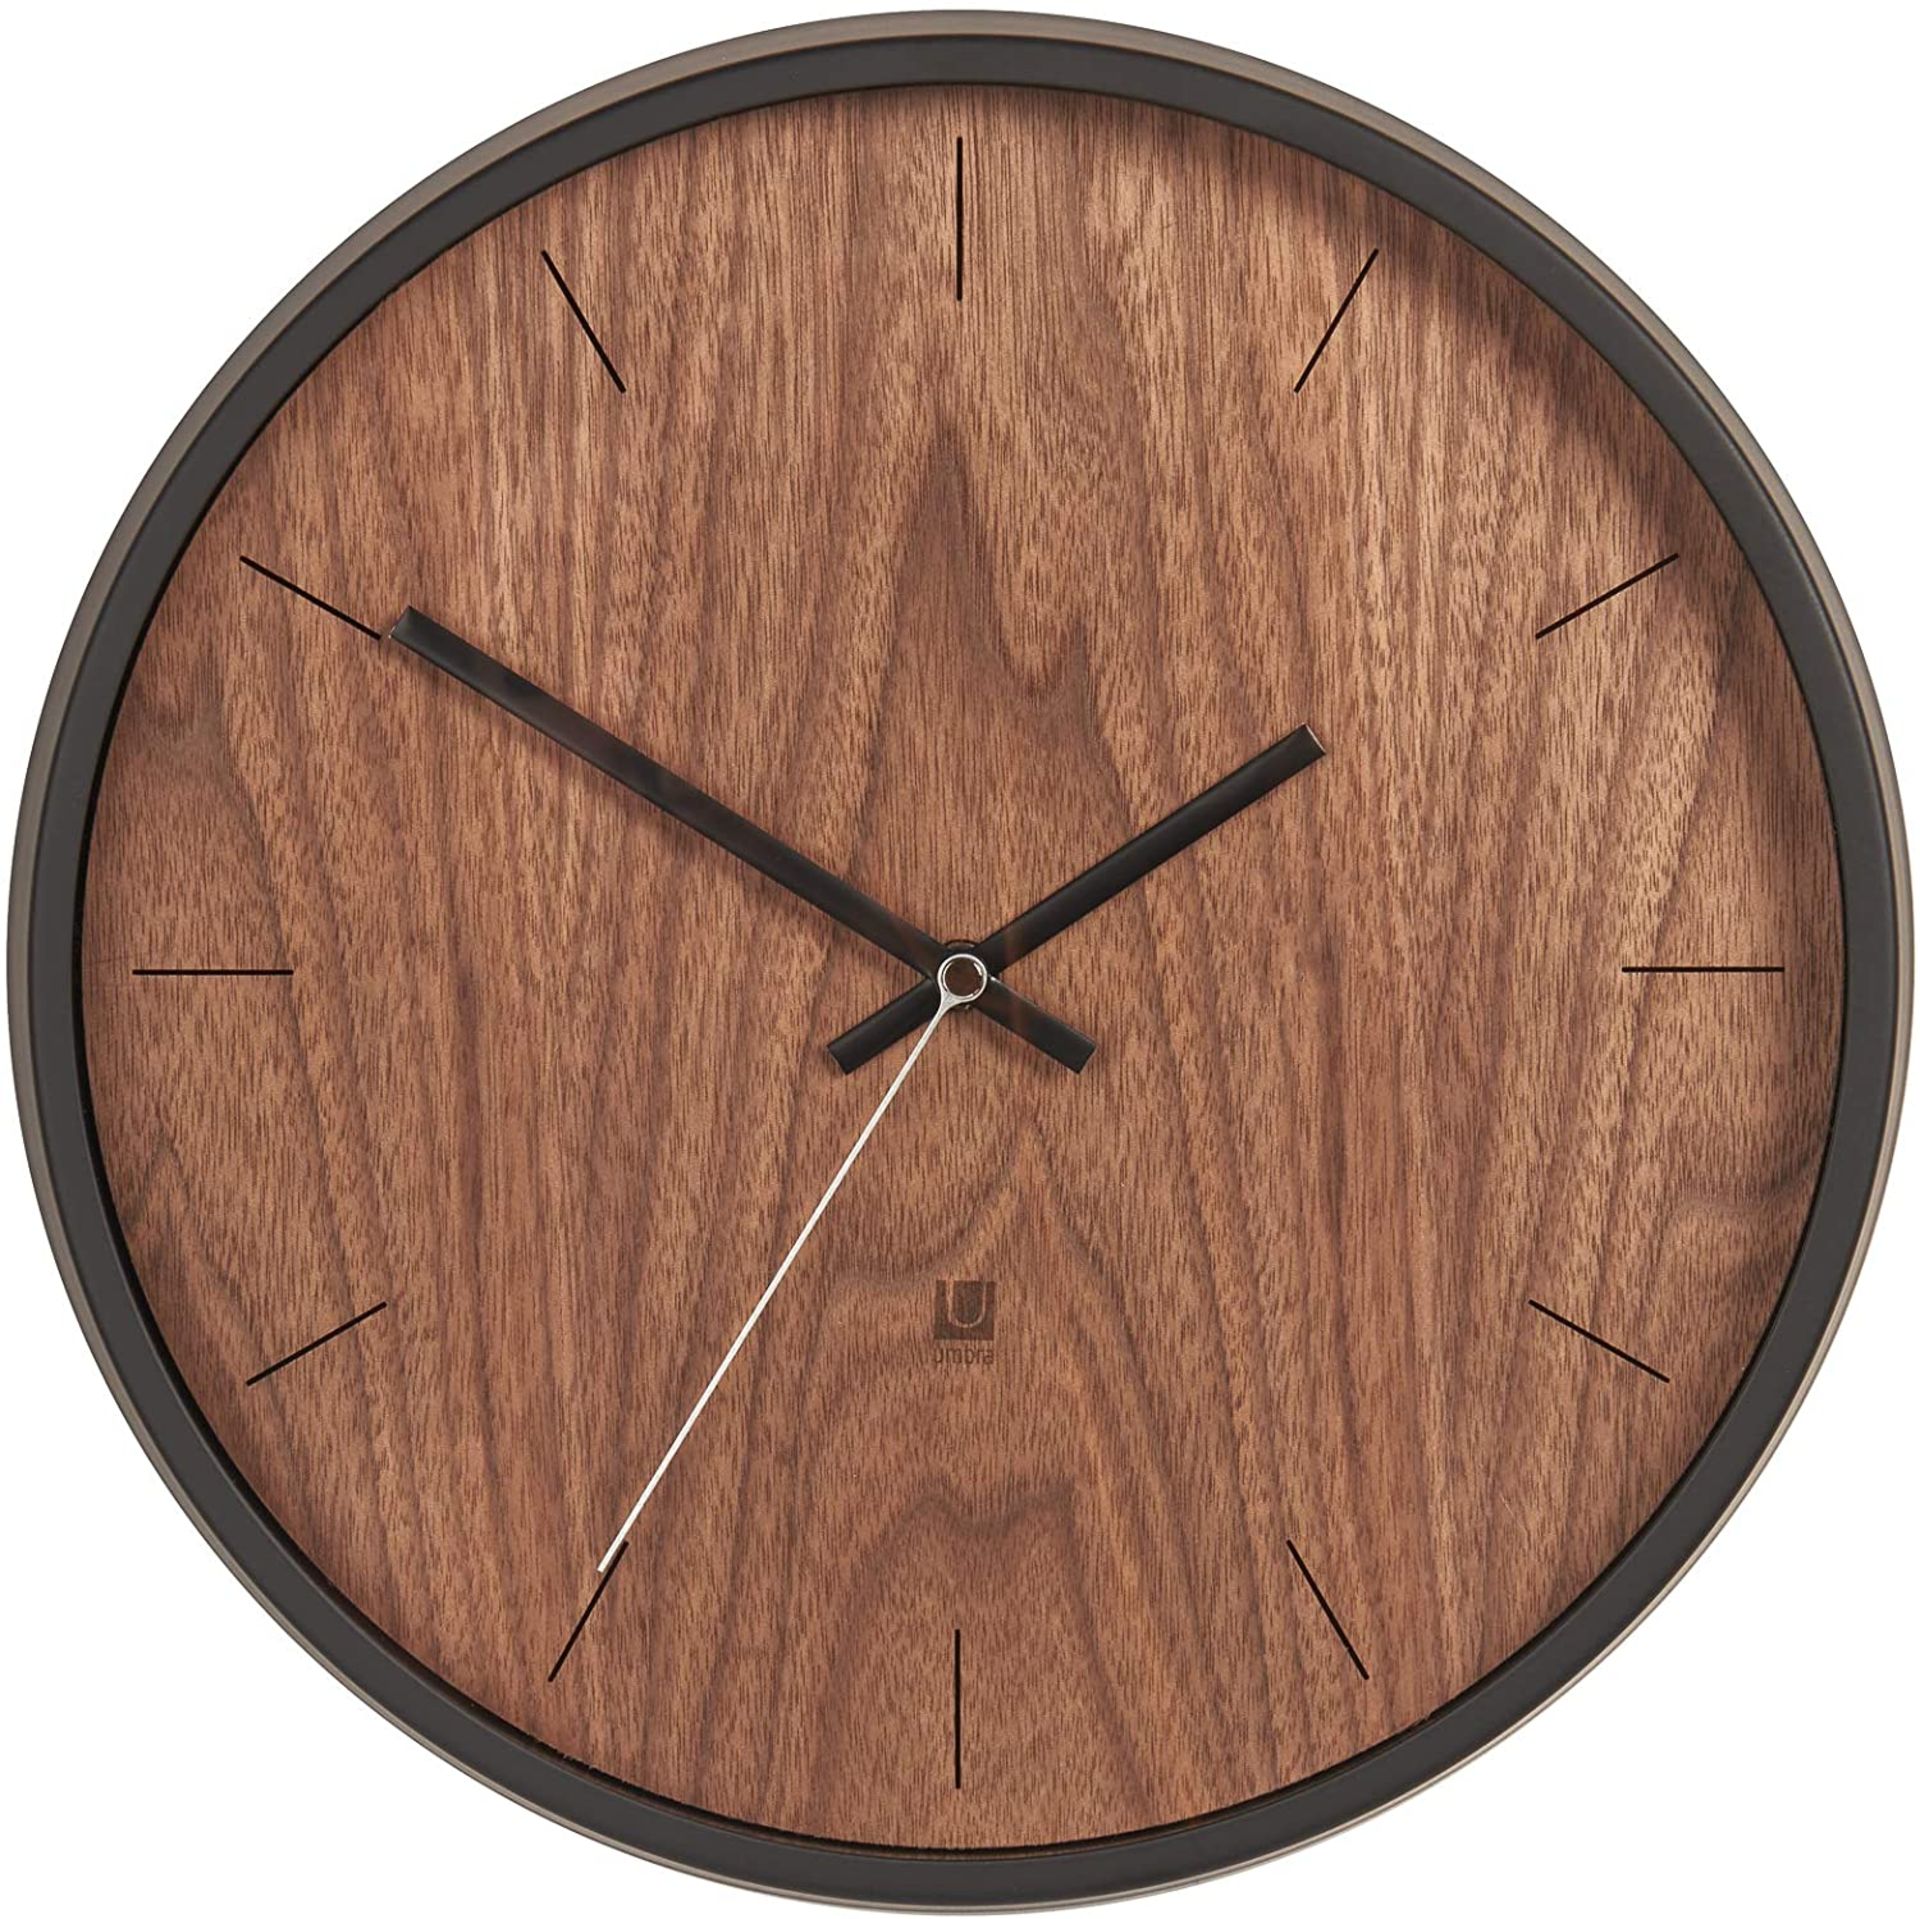 1 x 'Madera' Designer Wall Clock Featuring A Black Frame And Walnut Face - 32cm Diameter - Brand New - Image 5 of 5